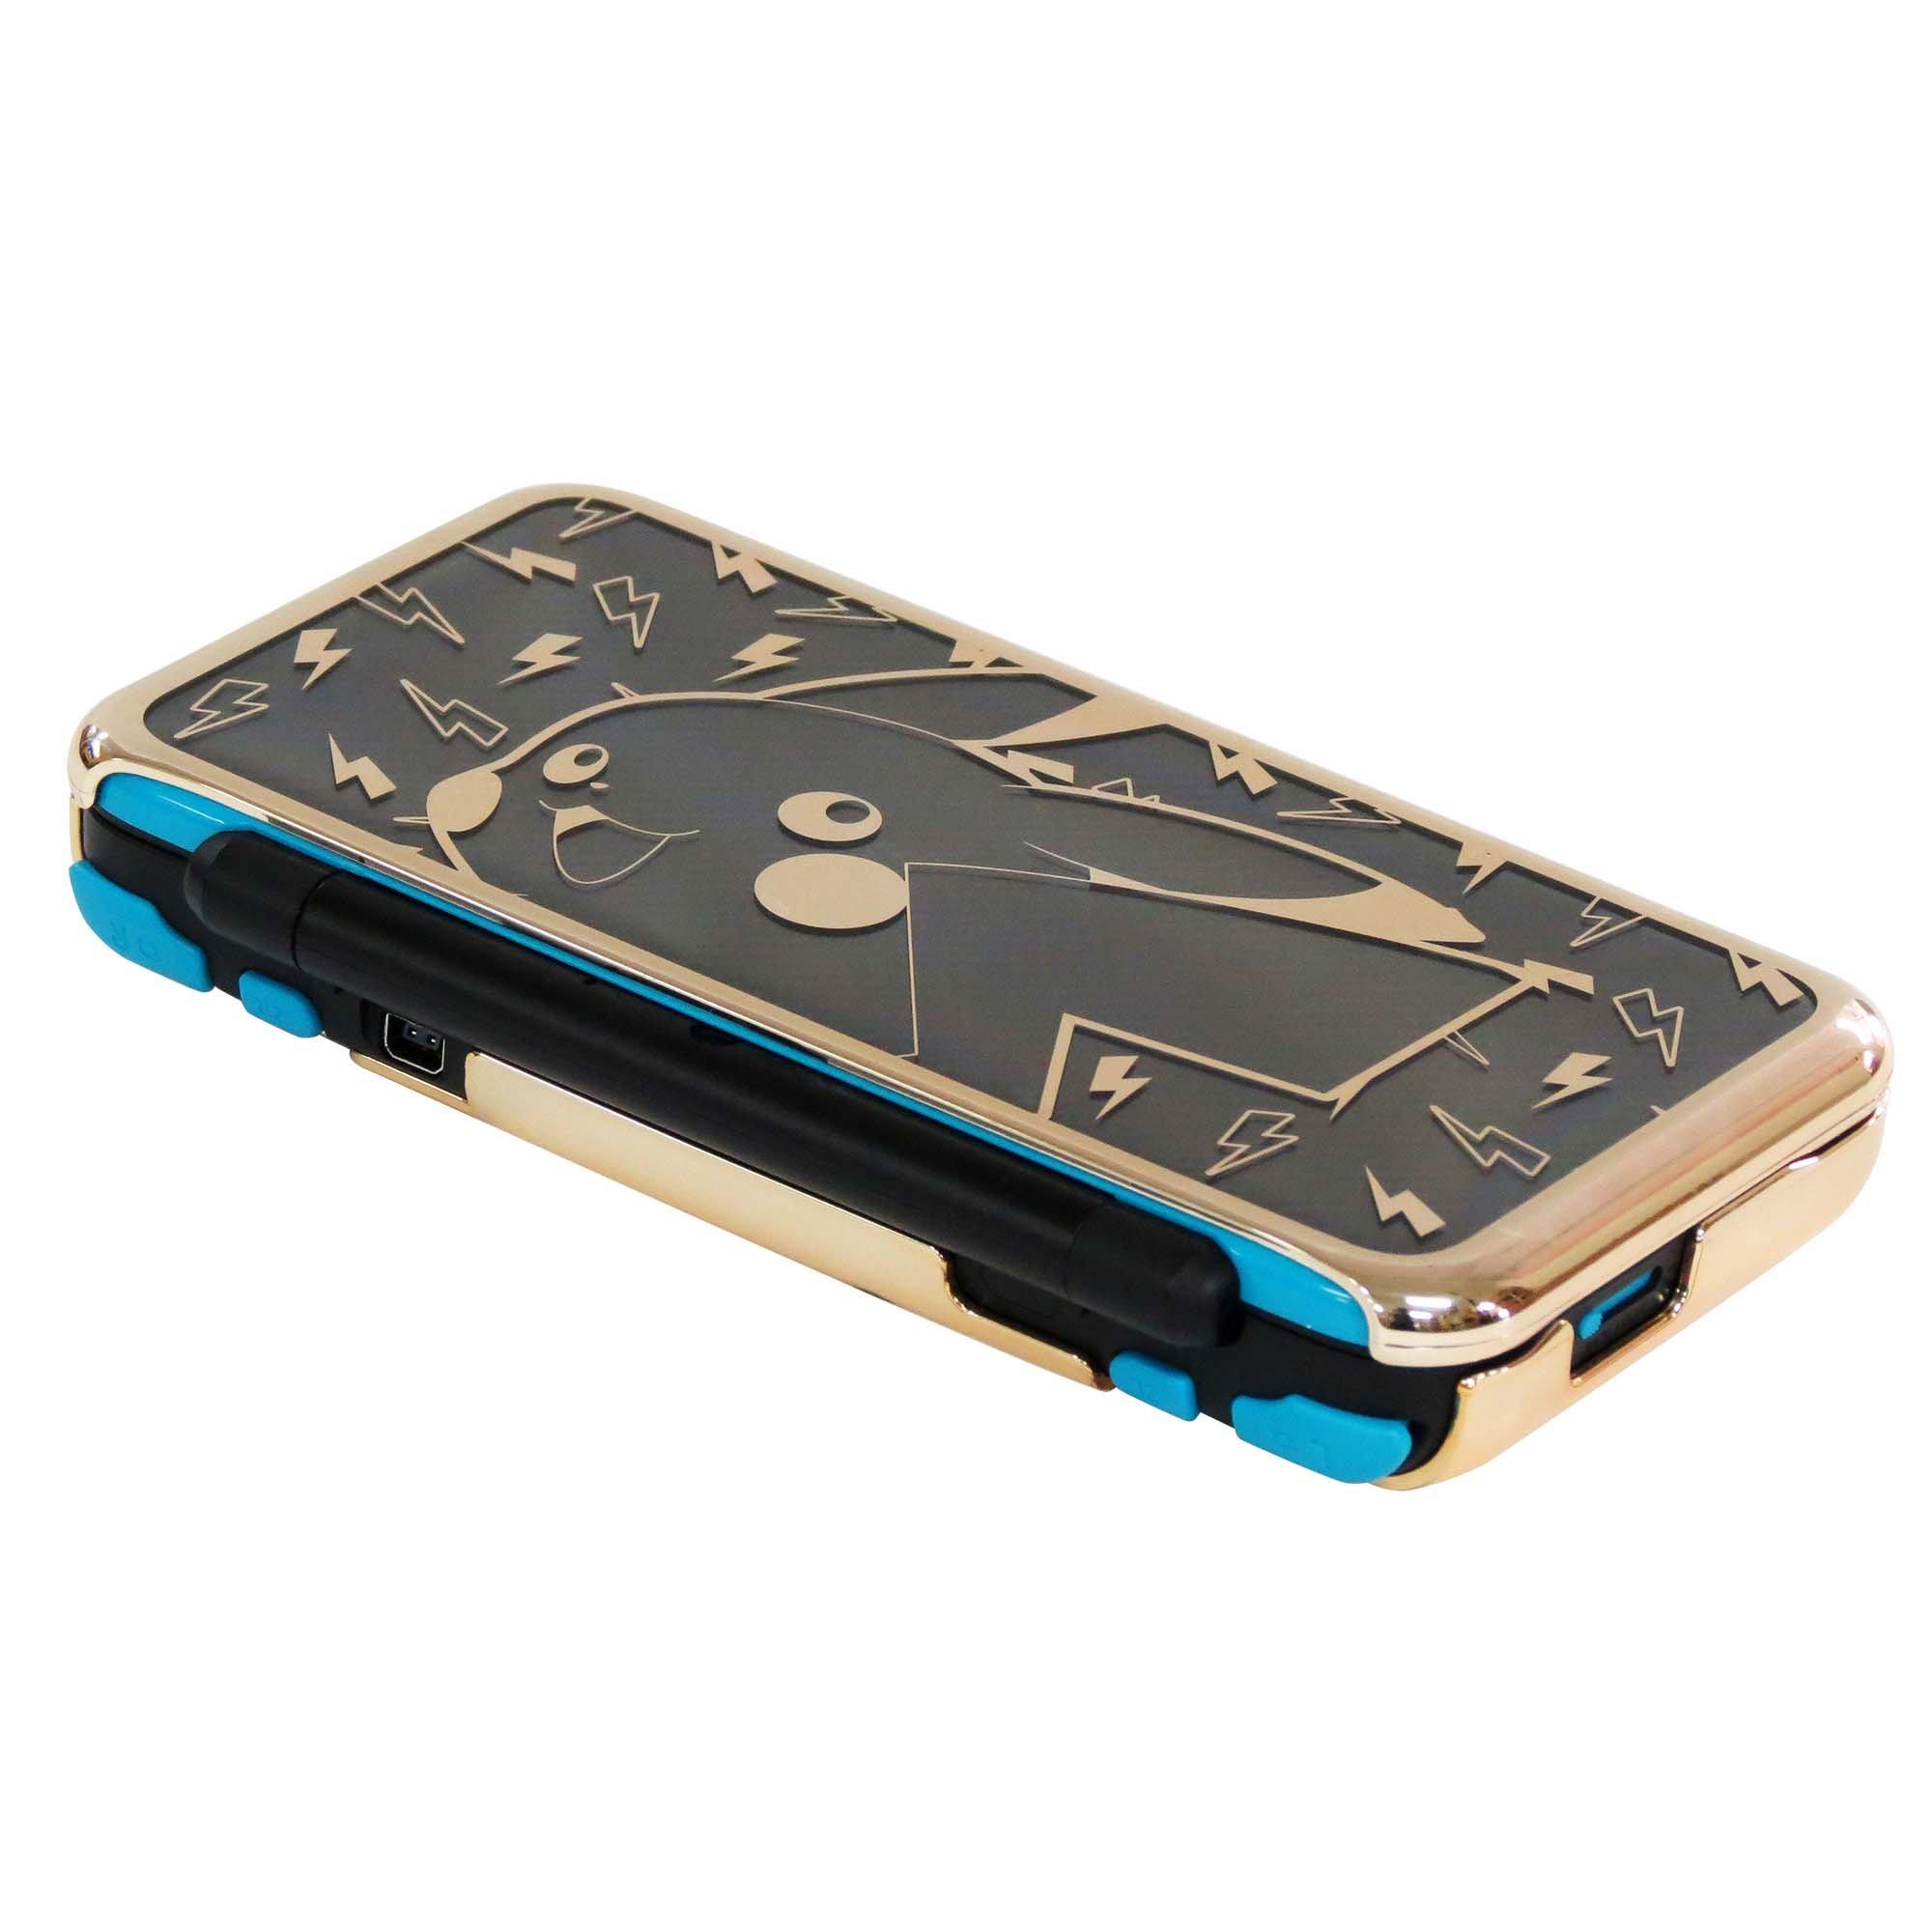 list item 2 of 4 Pikachu Gold Protector Case for New Nintendo 2DS XL